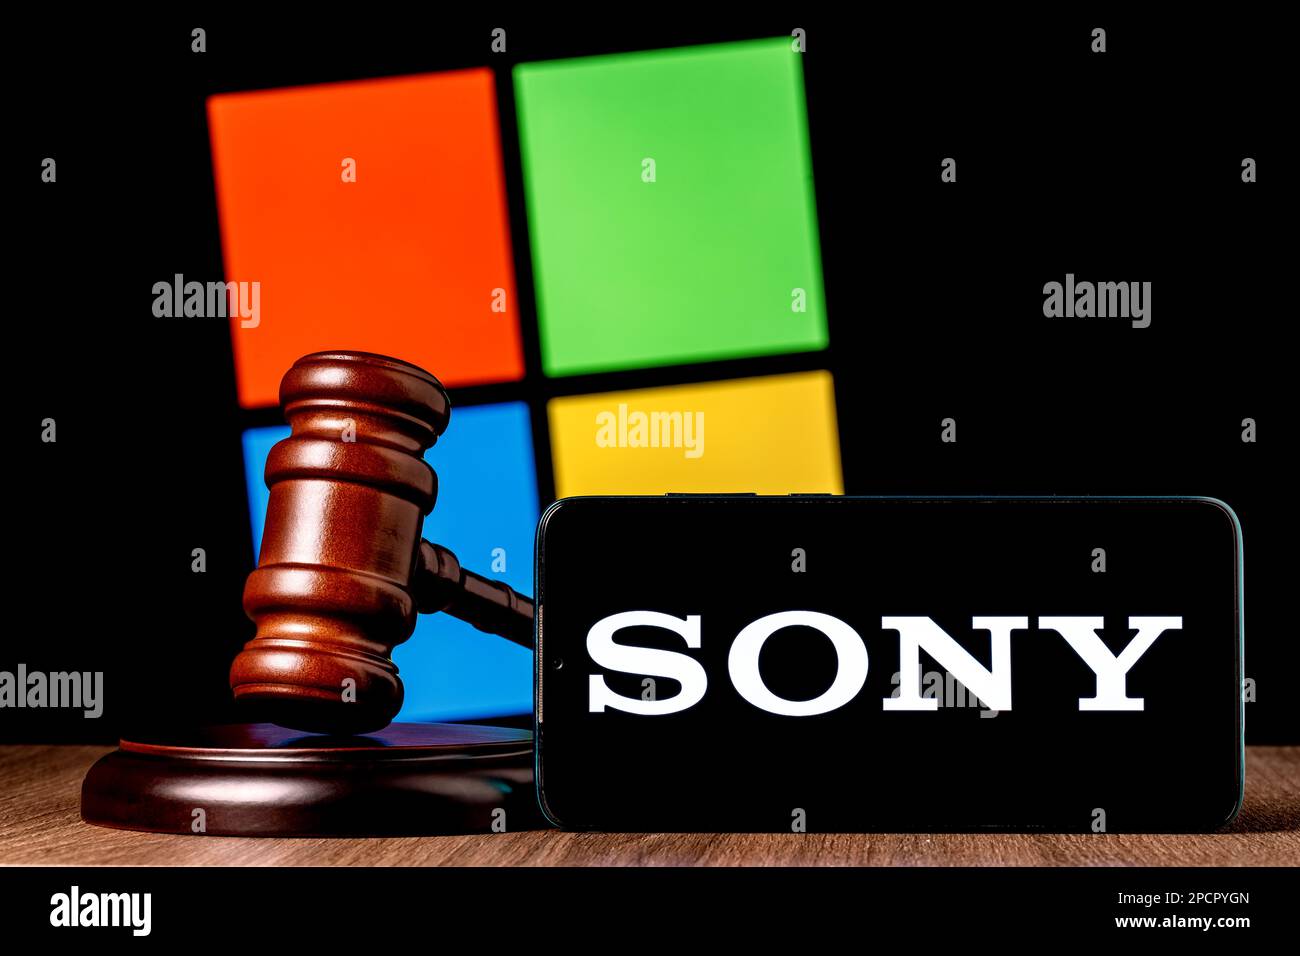 Gavel and smartphone with SONY logo on screen on table against background of Microsoft company logo. The concept of trial between Sony and Microsoft. Stock Photo